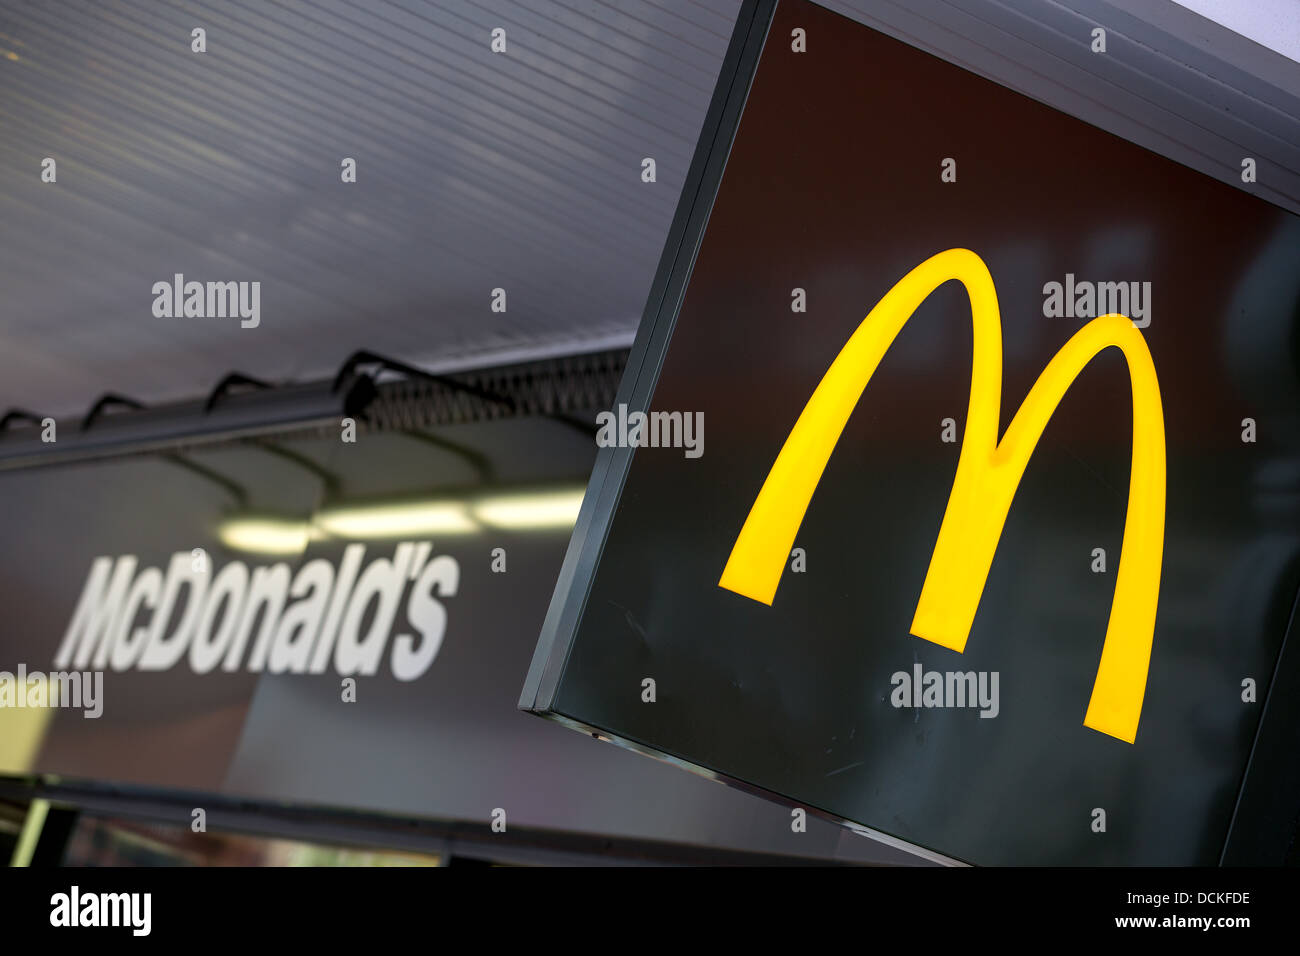 19/08/2013 Mcdonald's restaurant sign in Southend-on-sea Stock Photo